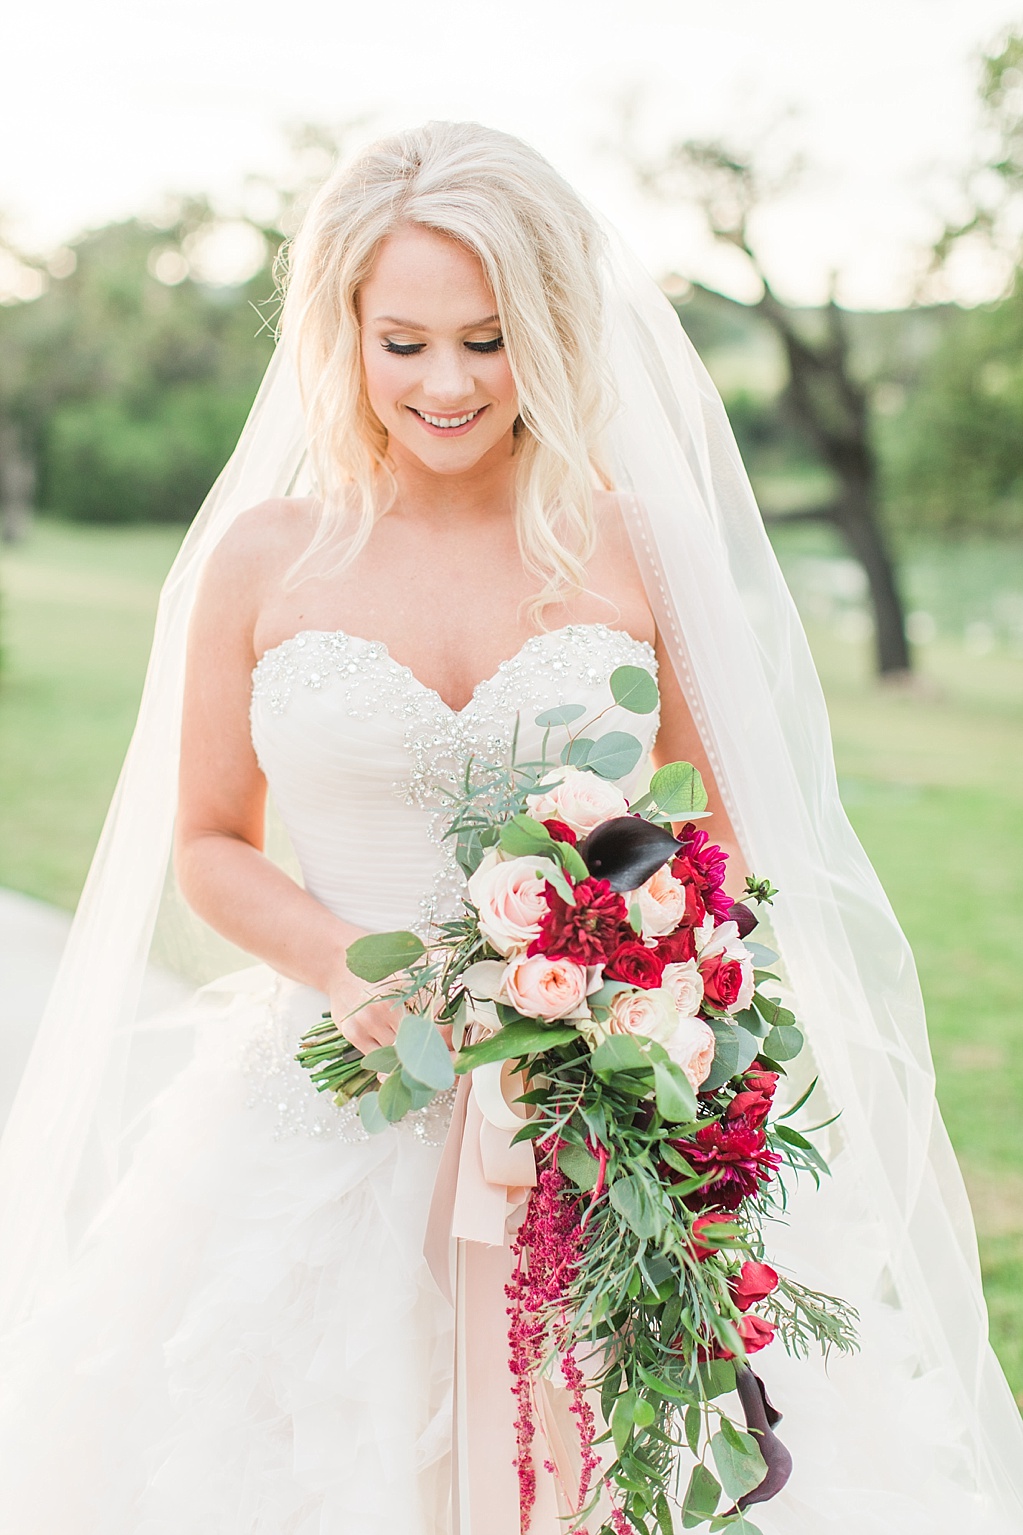 A Classic Bridal Session at Turtle Creek Olive Grove Wedding Venue in Kerrville, Texas 0012